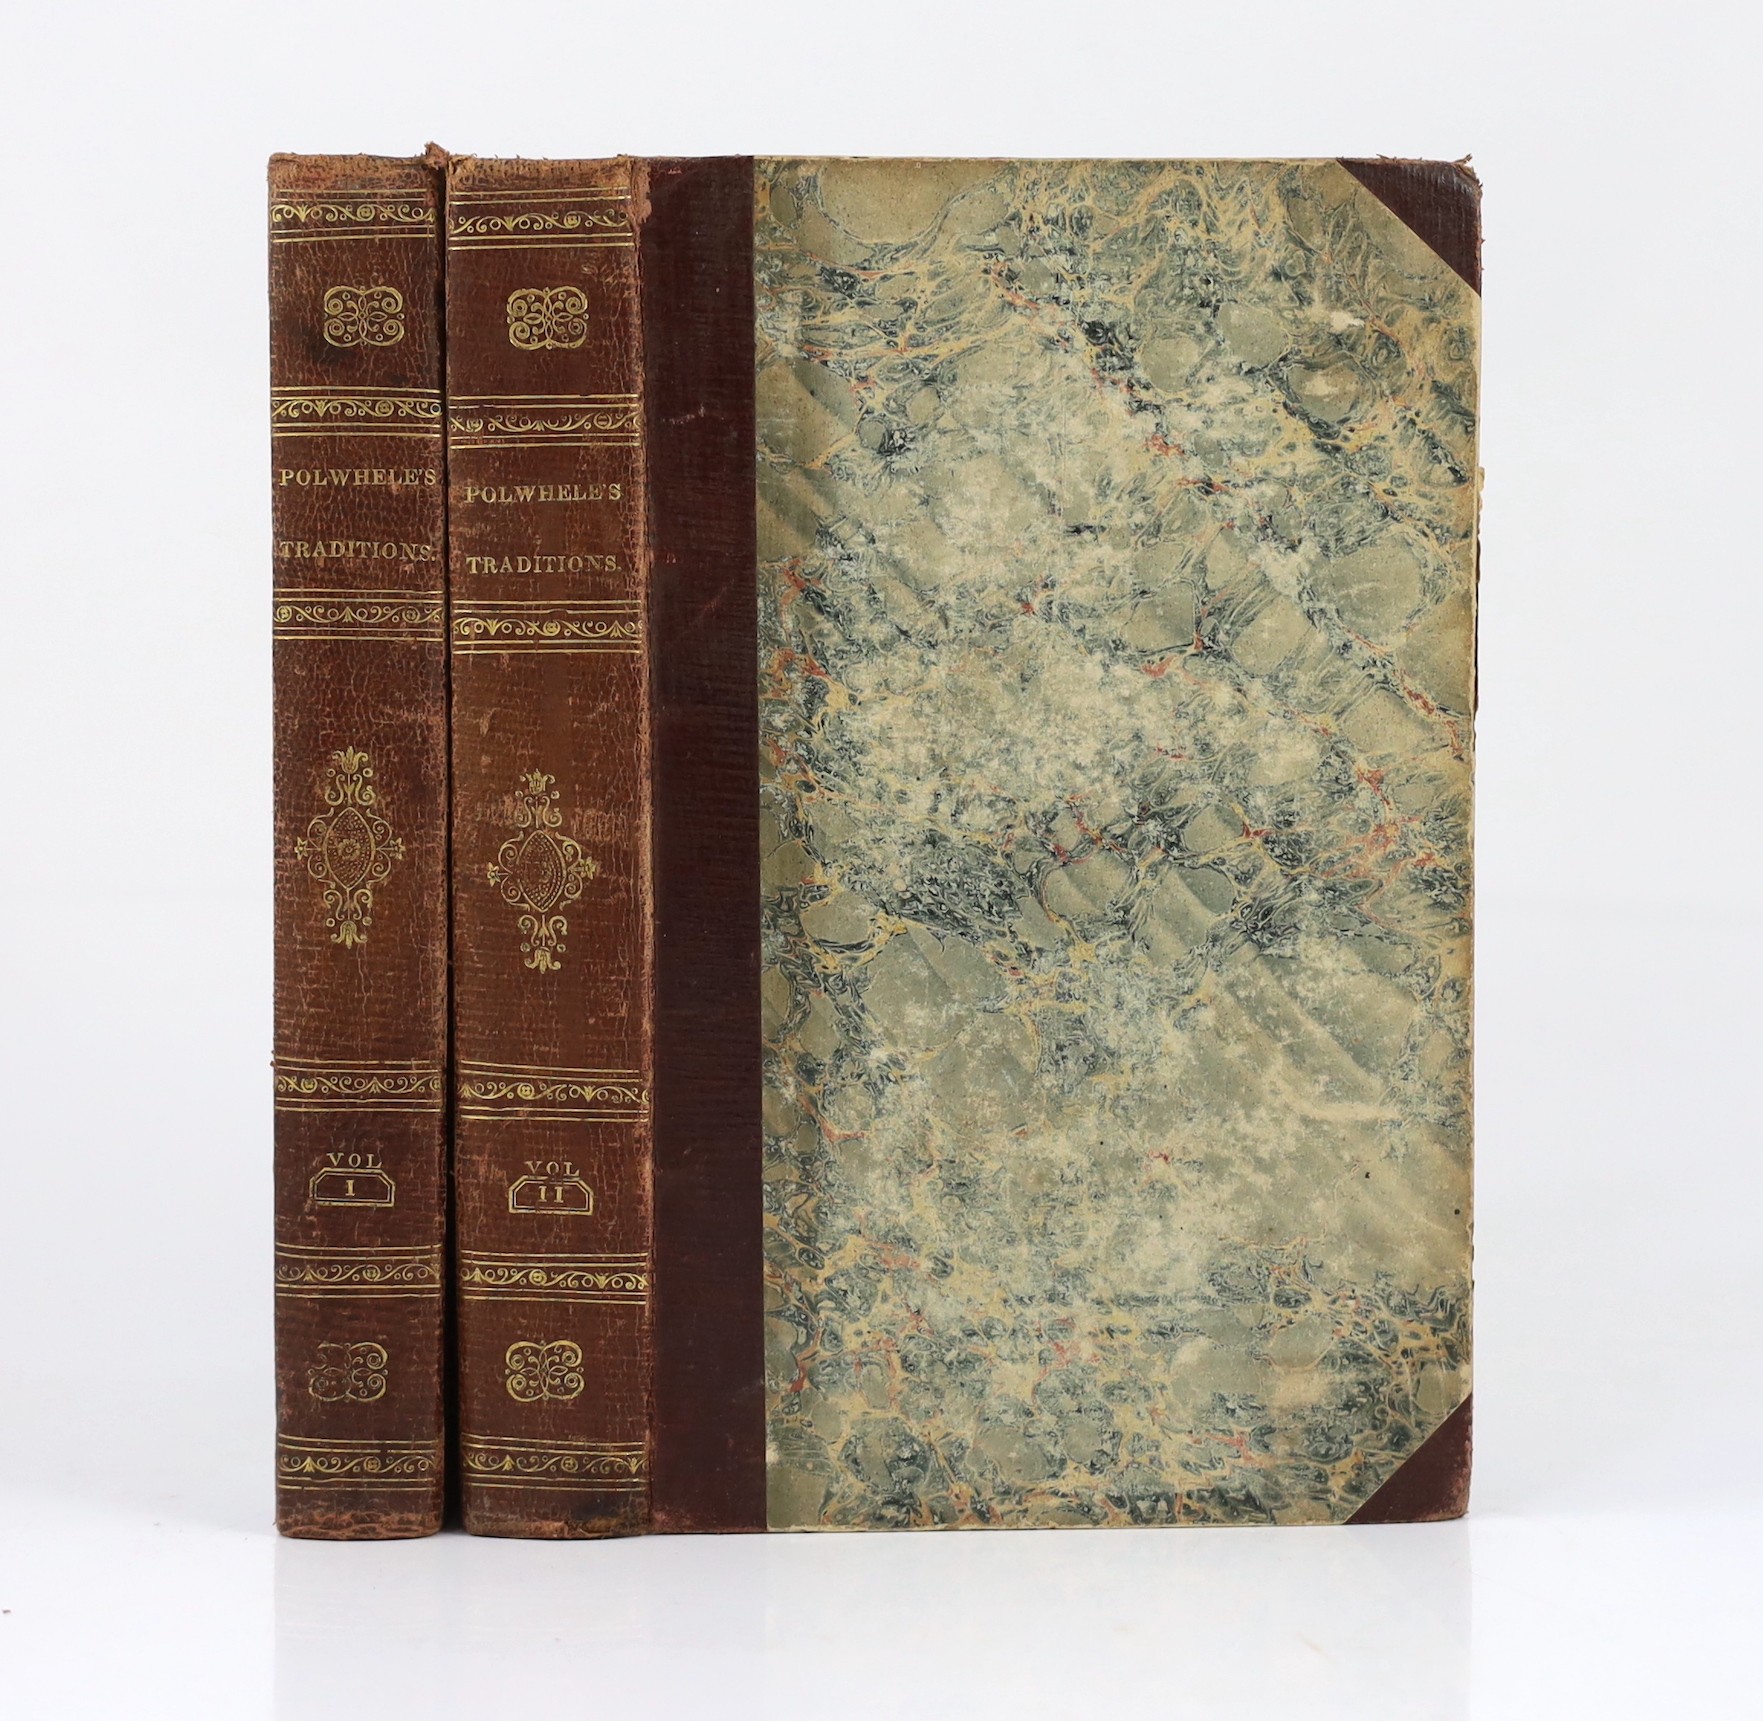 CORNWALL: Polwhele, Rev. R. - Traditions and Recollections; domestic, clerical, and literary ... 2 vols. portrait frontis & 5 folded plates; contemp. gilt maroon half morocco and marbled boards, 1826. (2)